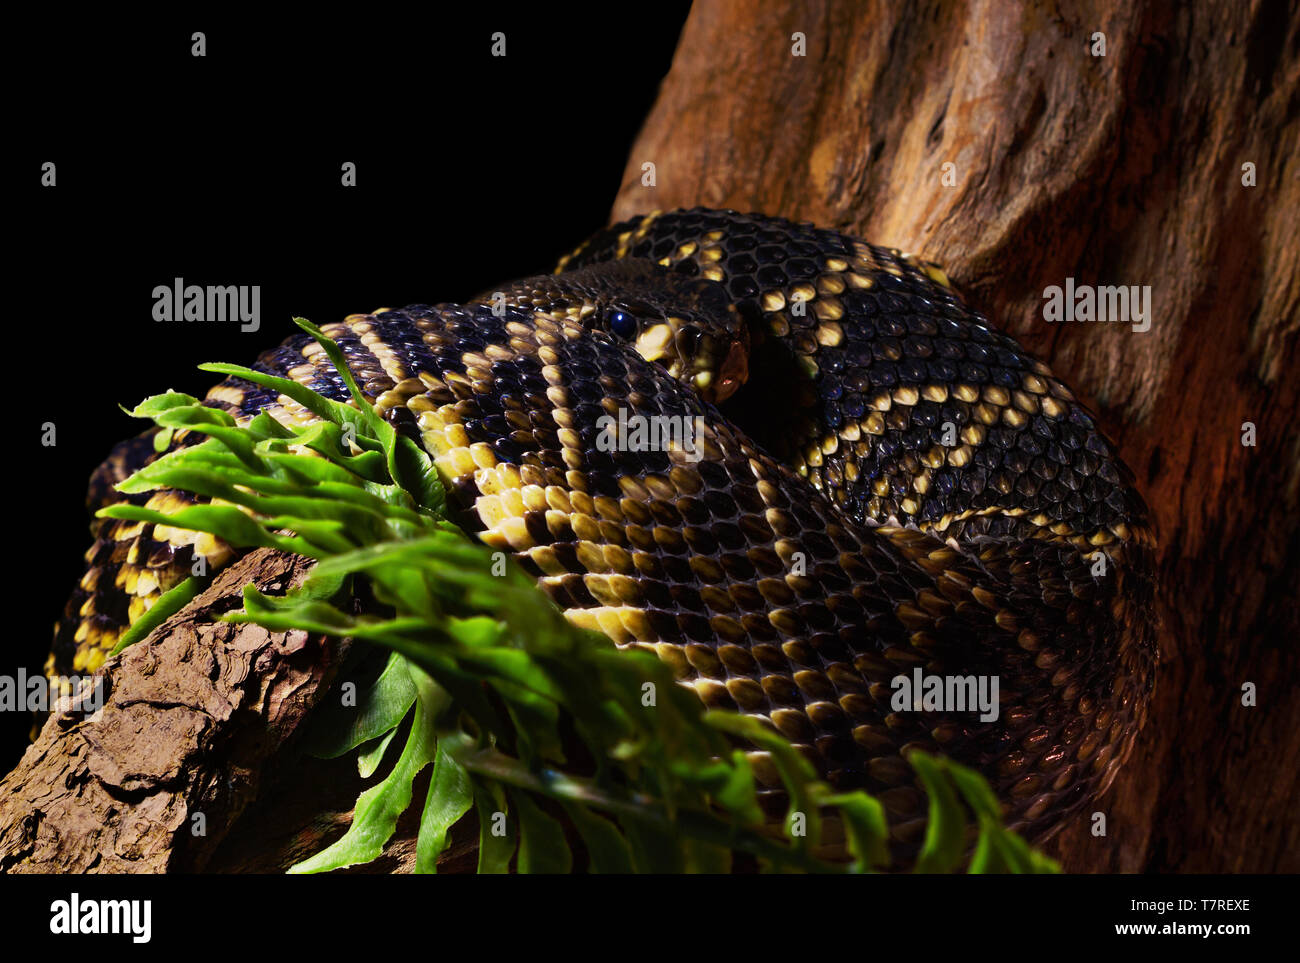 Around a tree, the rattlesnake has wrapped itself. Stock Photo